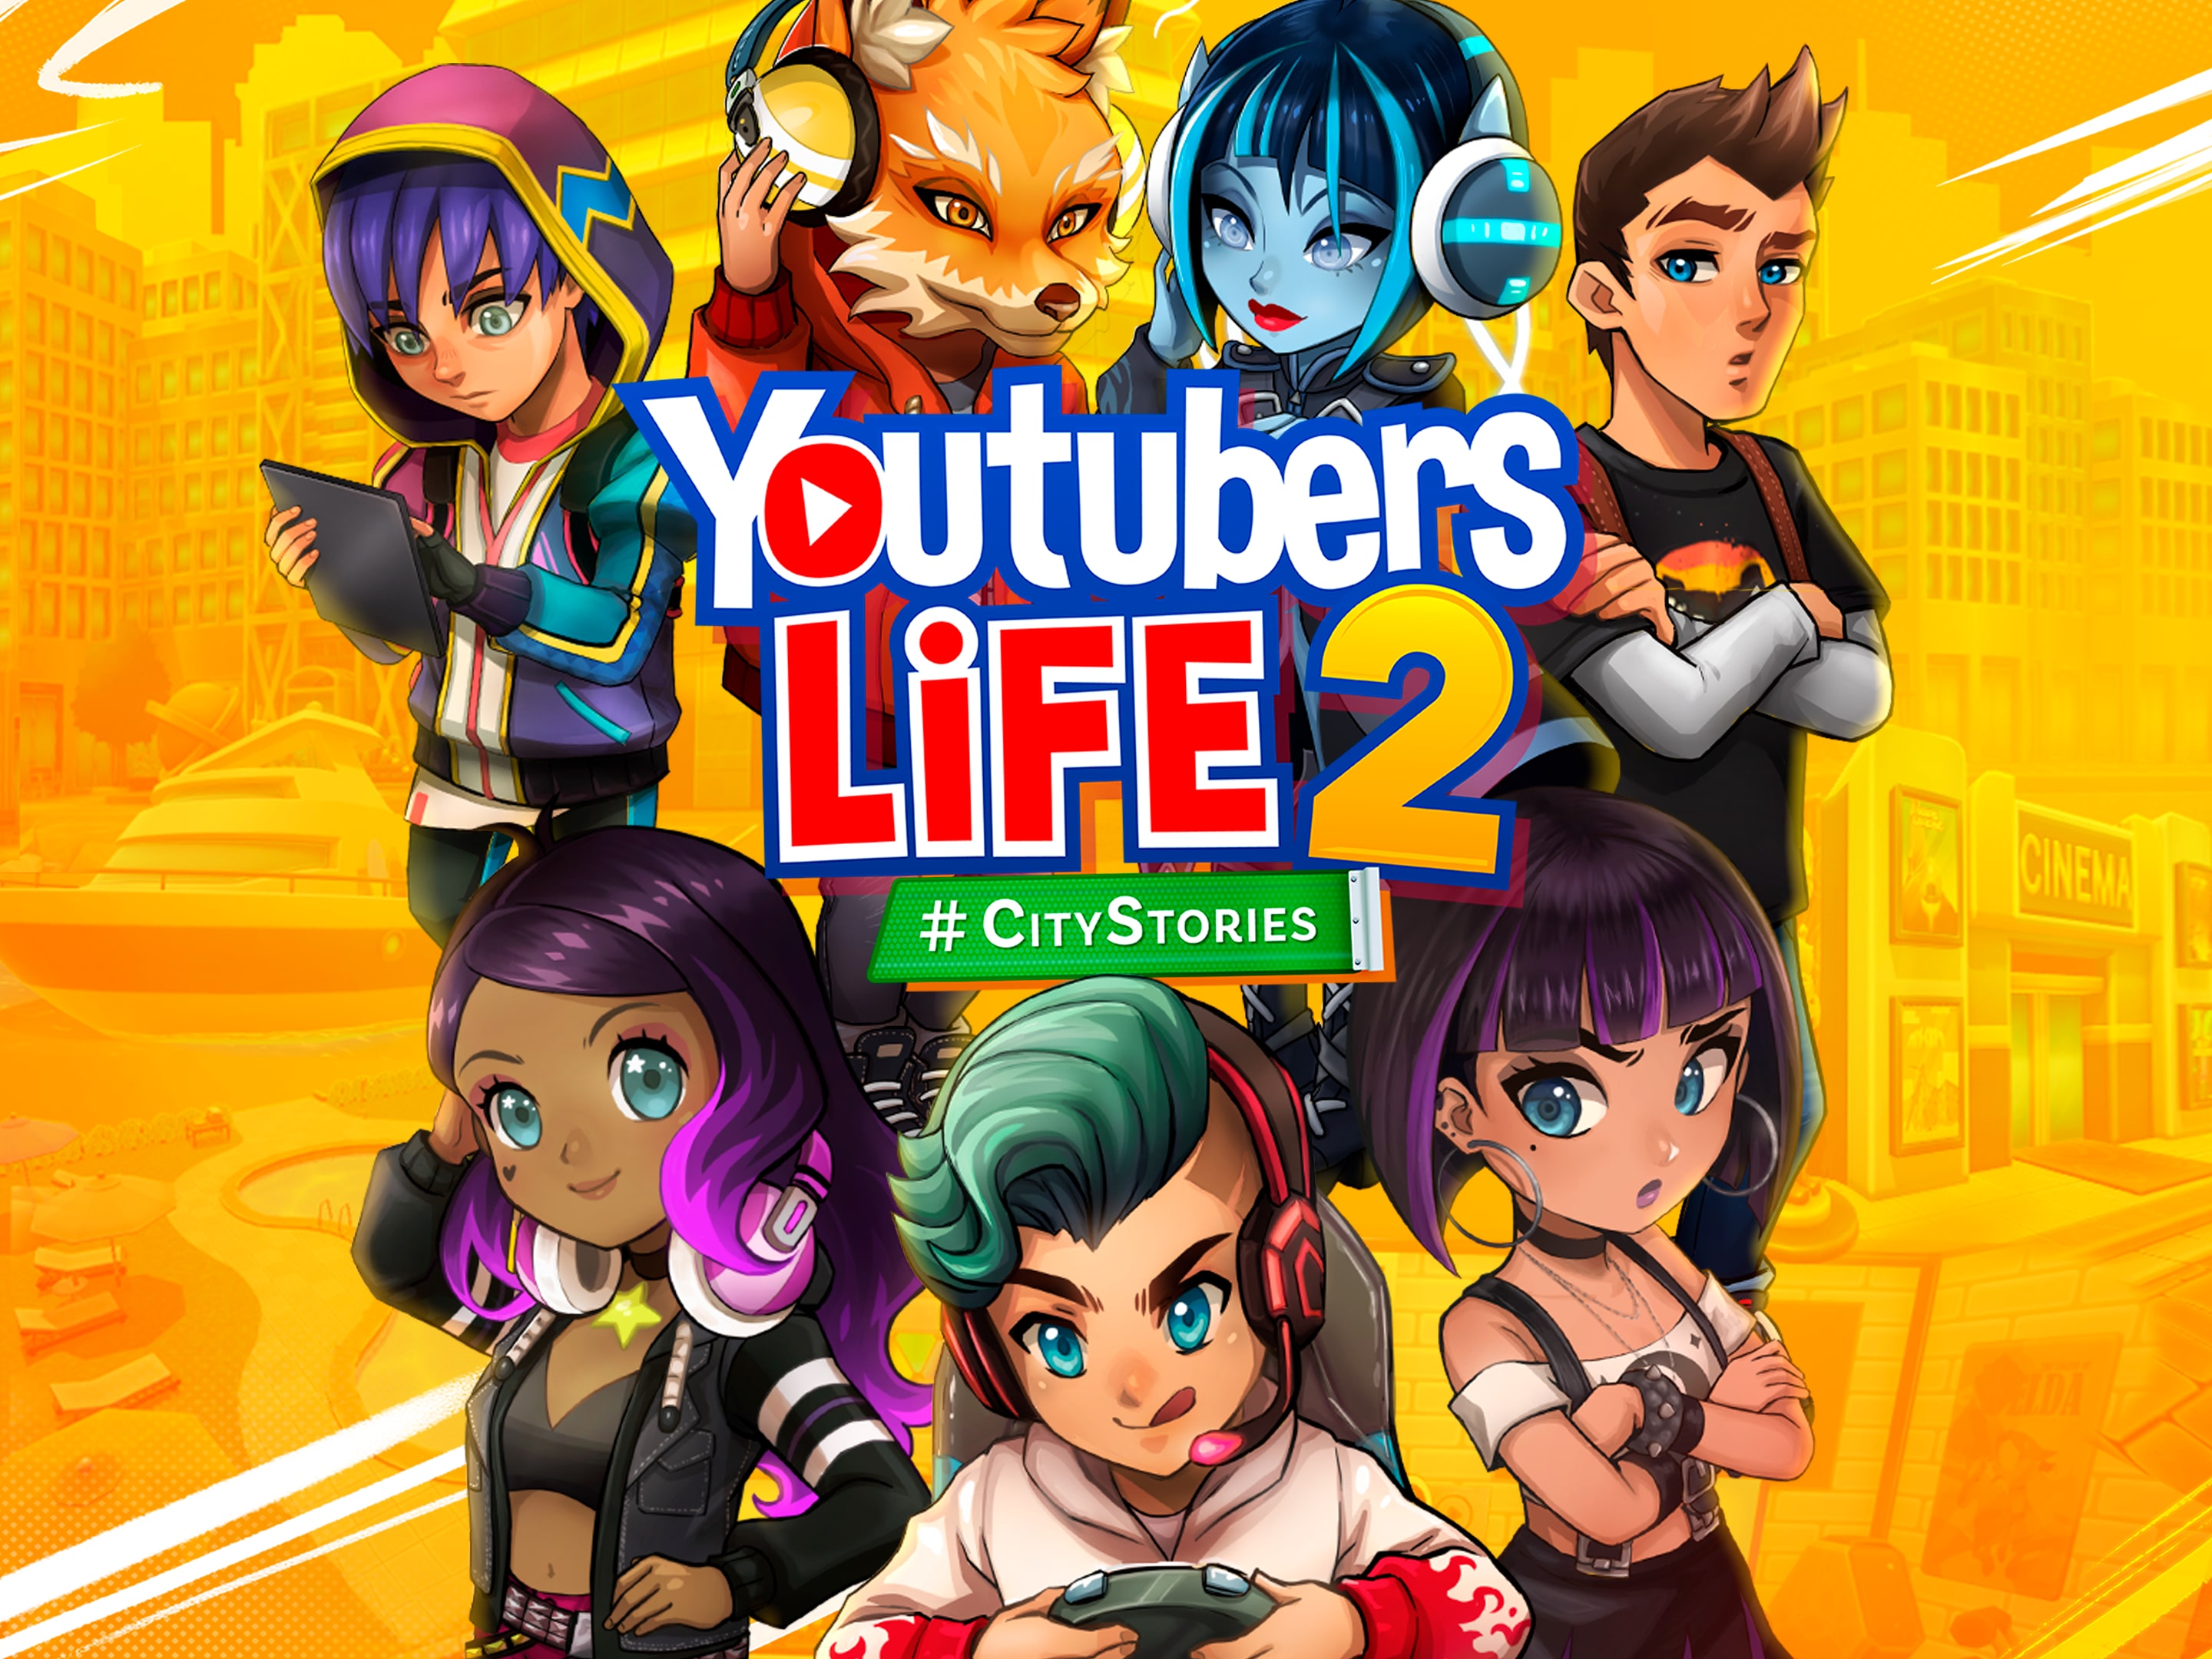 rs Life 2 (English) for PlayStation 4